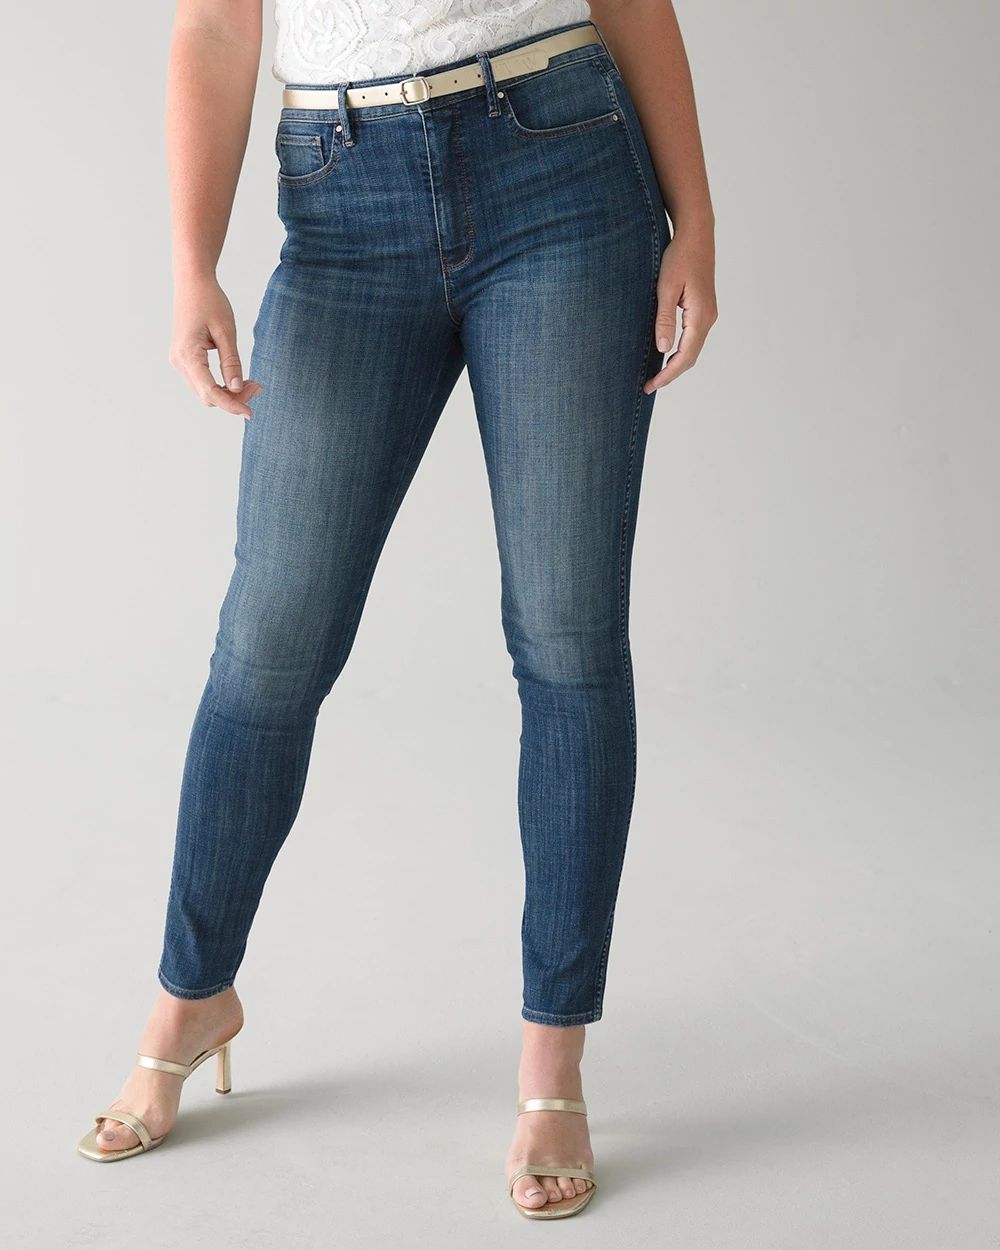 Curvy-Fit Everyday Soft Denim  Extra High-Rise Skinny Jeans click to view larger image.